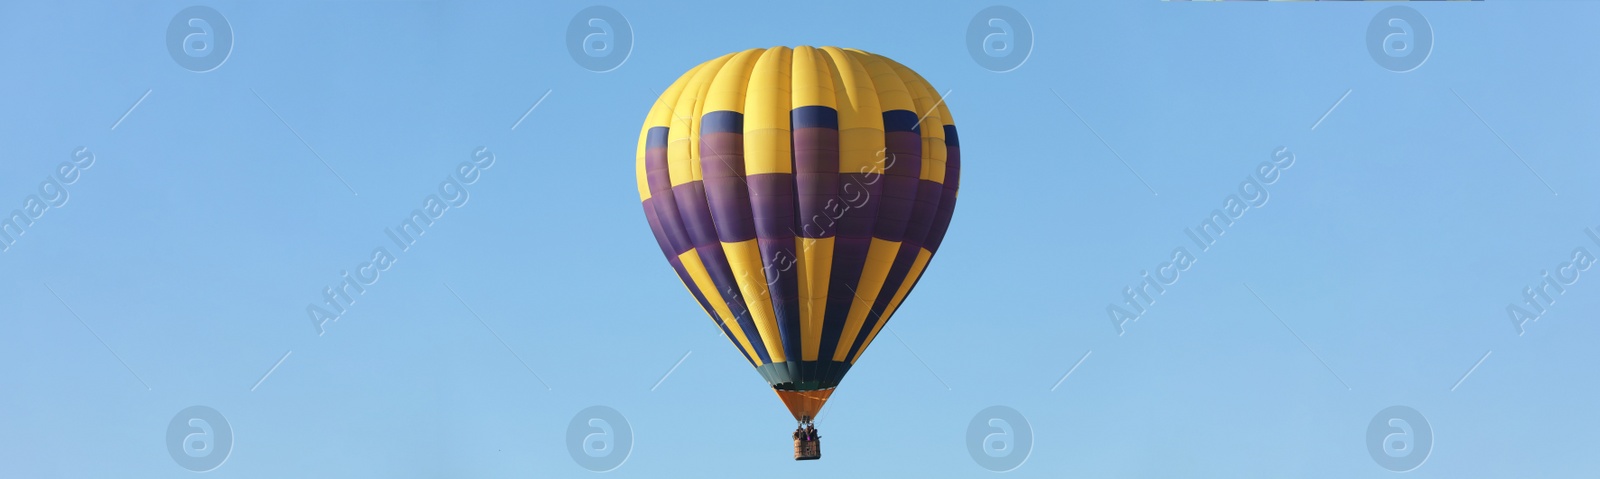 Image of Hot air balloon in blue sky. Banner design 